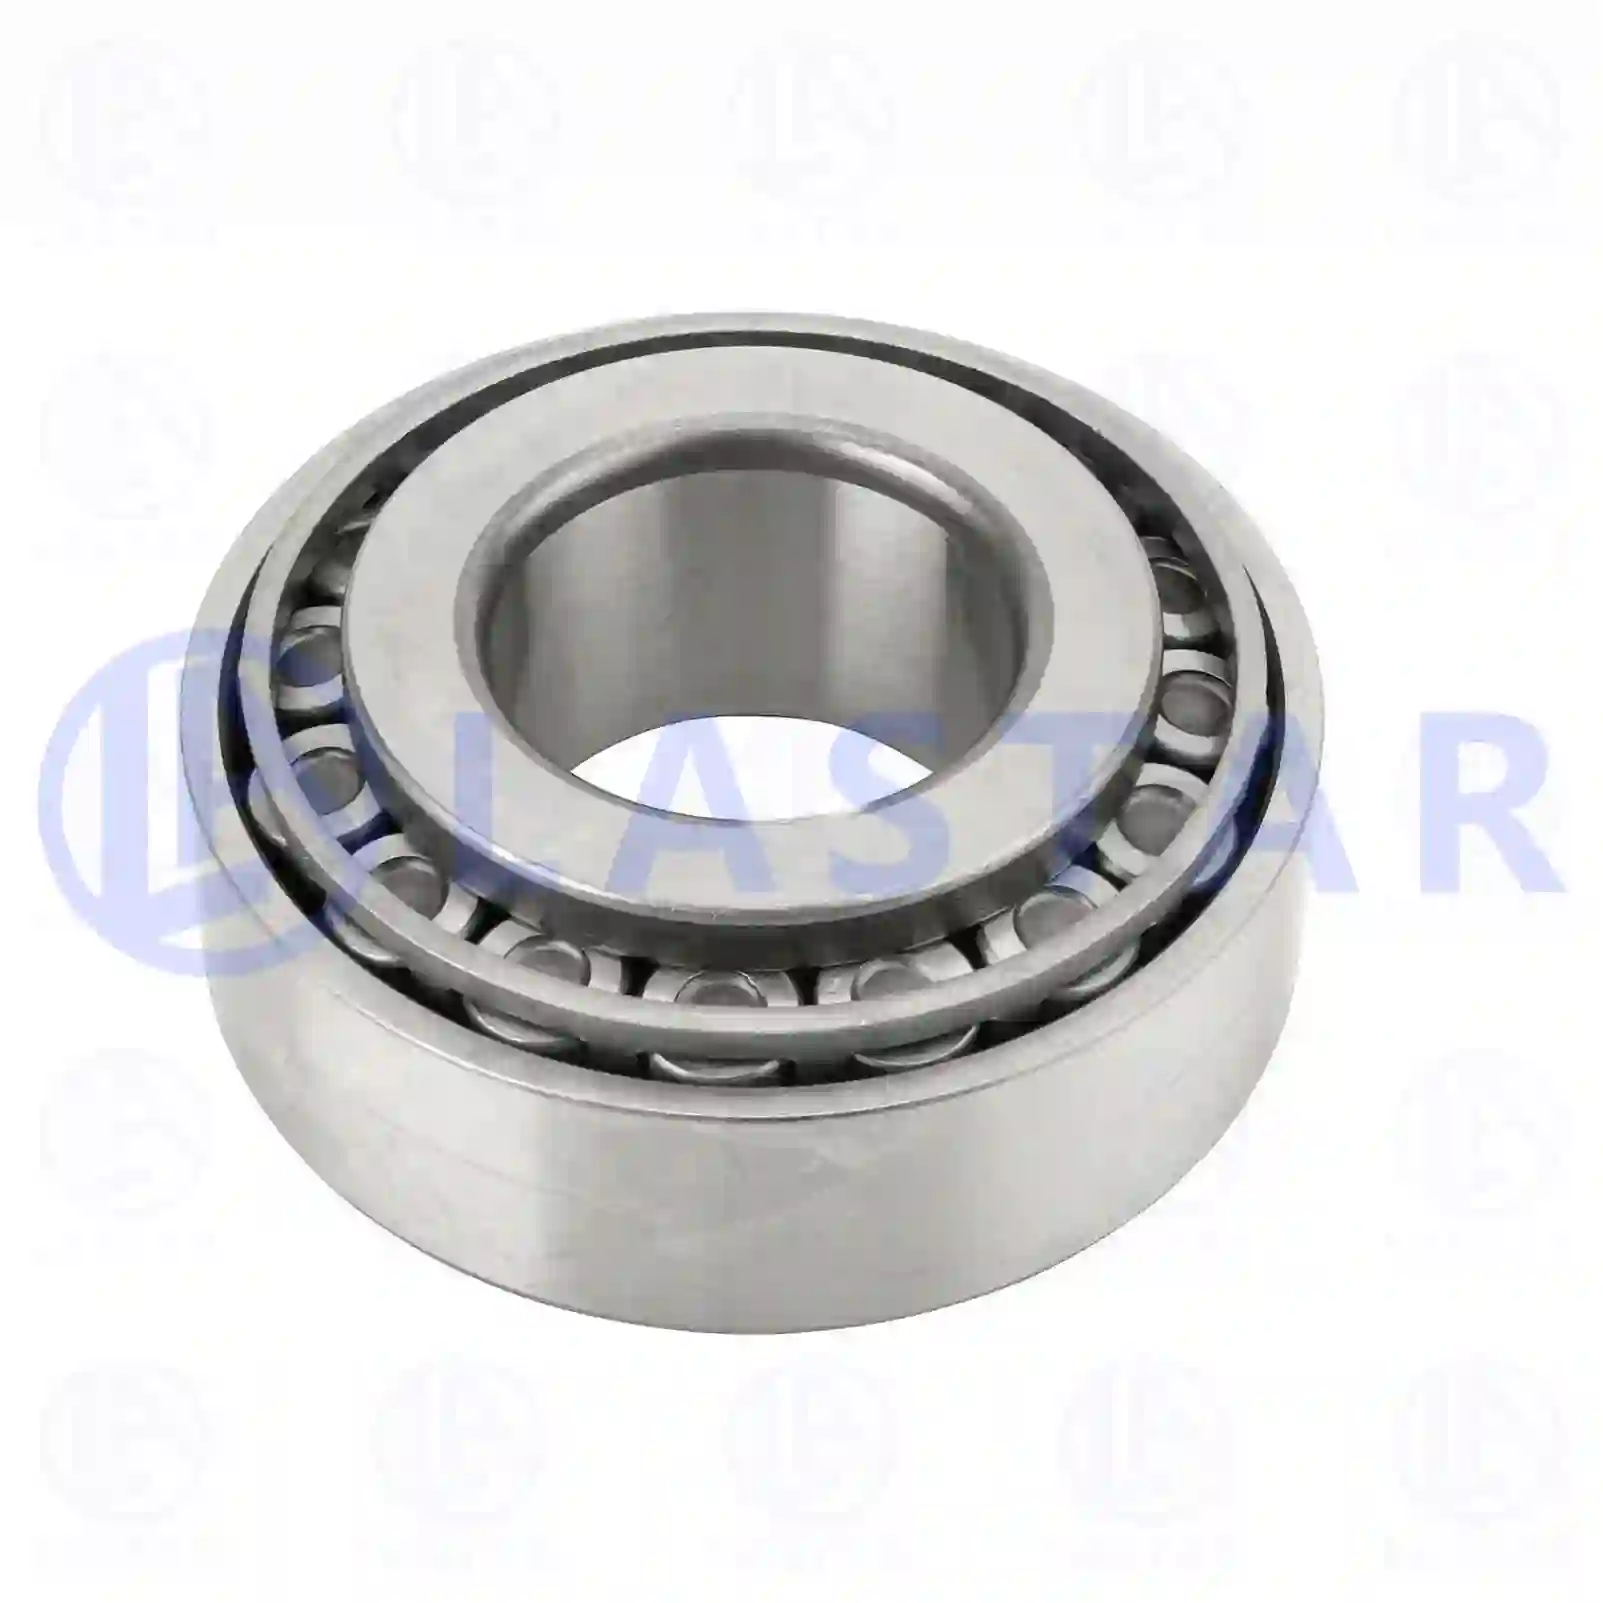 Tapered roller bearing, 77726312, 0264065000, 0264102500, 0556289, 0626875, 0626876, 1489090, 556289, 626875, 626876, 692180, 07982089, 26800600, 06324903200, 06324990016, 06324990034, 81440500074, 81934200131, 000720032310, 0019808202, 0019812905, 0019817405, 0019817605, 0019818202, 0019892905, 0069819905, 99041068, 99041068B, 14735, 6691169000, 11062, 183687, ZG03021-0008 ||  77726312 Lastar Spare Part | Truck Spare Parts, Auotomotive Spare Parts Tapered roller bearing, 77726312, 0264065000, 0264102500, 0556289, 0626875, 0626876, 1489090, 556289, 626875, 626876, 692180, 07982089, 26800600, 06324903200, 06324990016, 06324990034, 81440500074, 81934200131, 000720032310, 0019808202, 0019812905, 0019817405, 0019817605, 0019818202, 0019892905, 0069819905, 99041068, 99041068B, 14735, 6691169000, 11062, 183687, ZG03021-0008 ||  77726312 Lastar Spare Part | Truck Spare Parts, Auotomotive Spare Parts